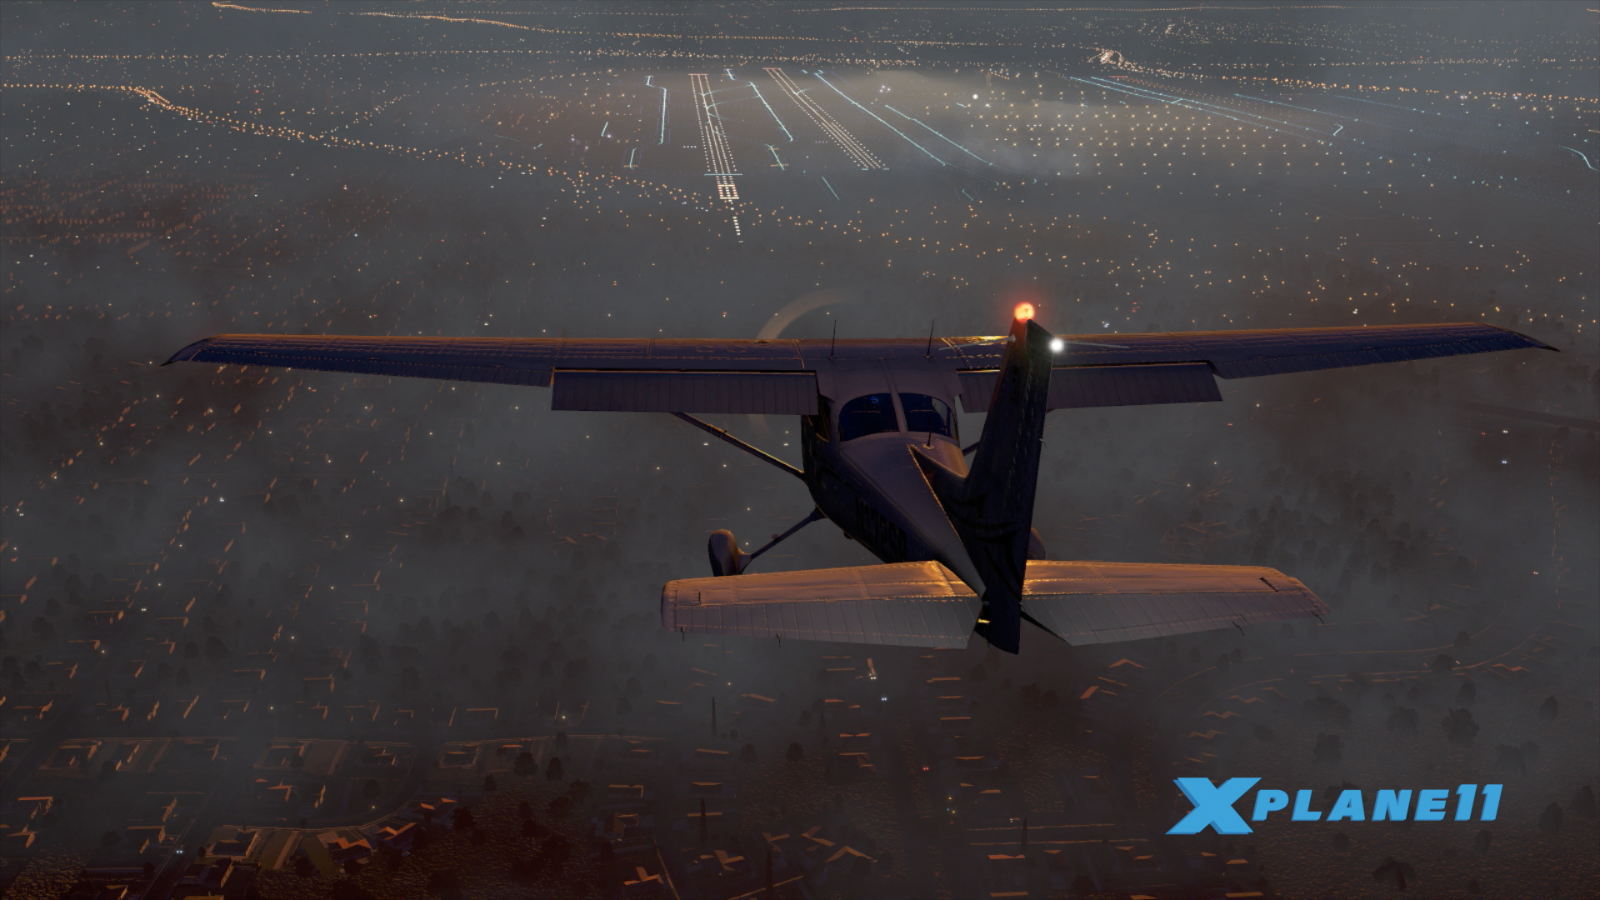 X Plane 11 Screenshots, Image And Picture